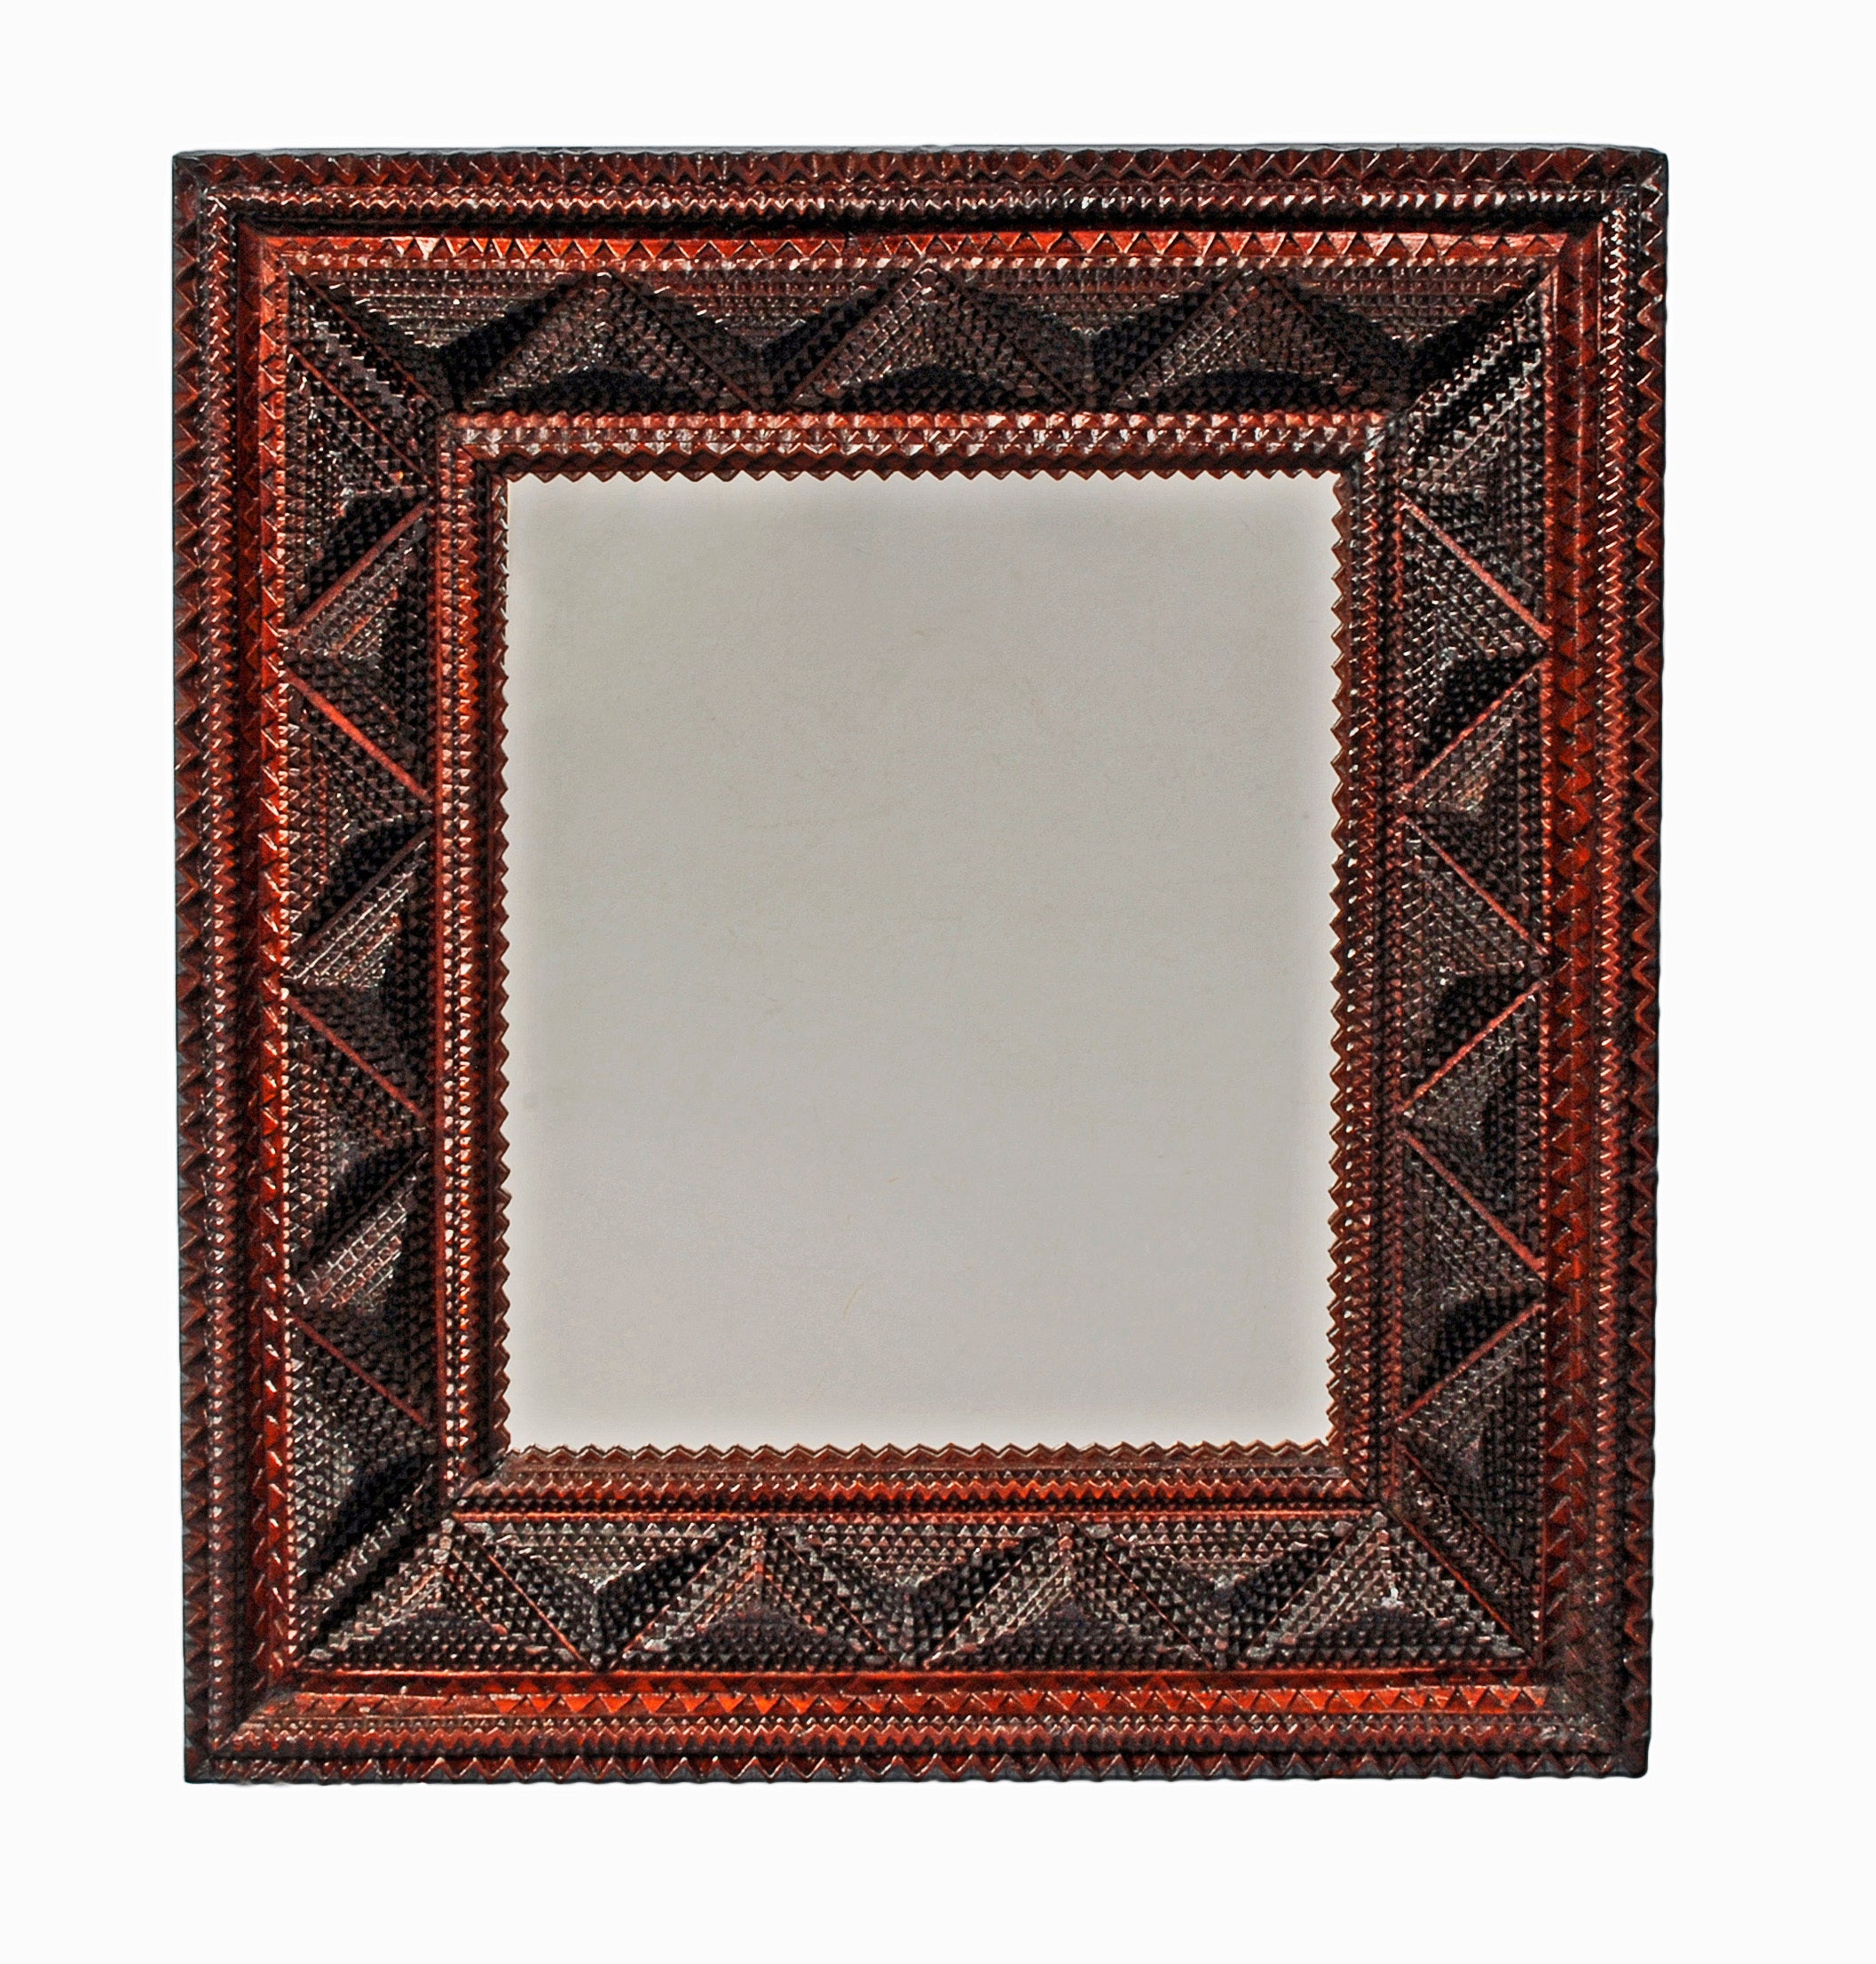 Handsome Deeply Layered Tramp Art Mirror For Sale